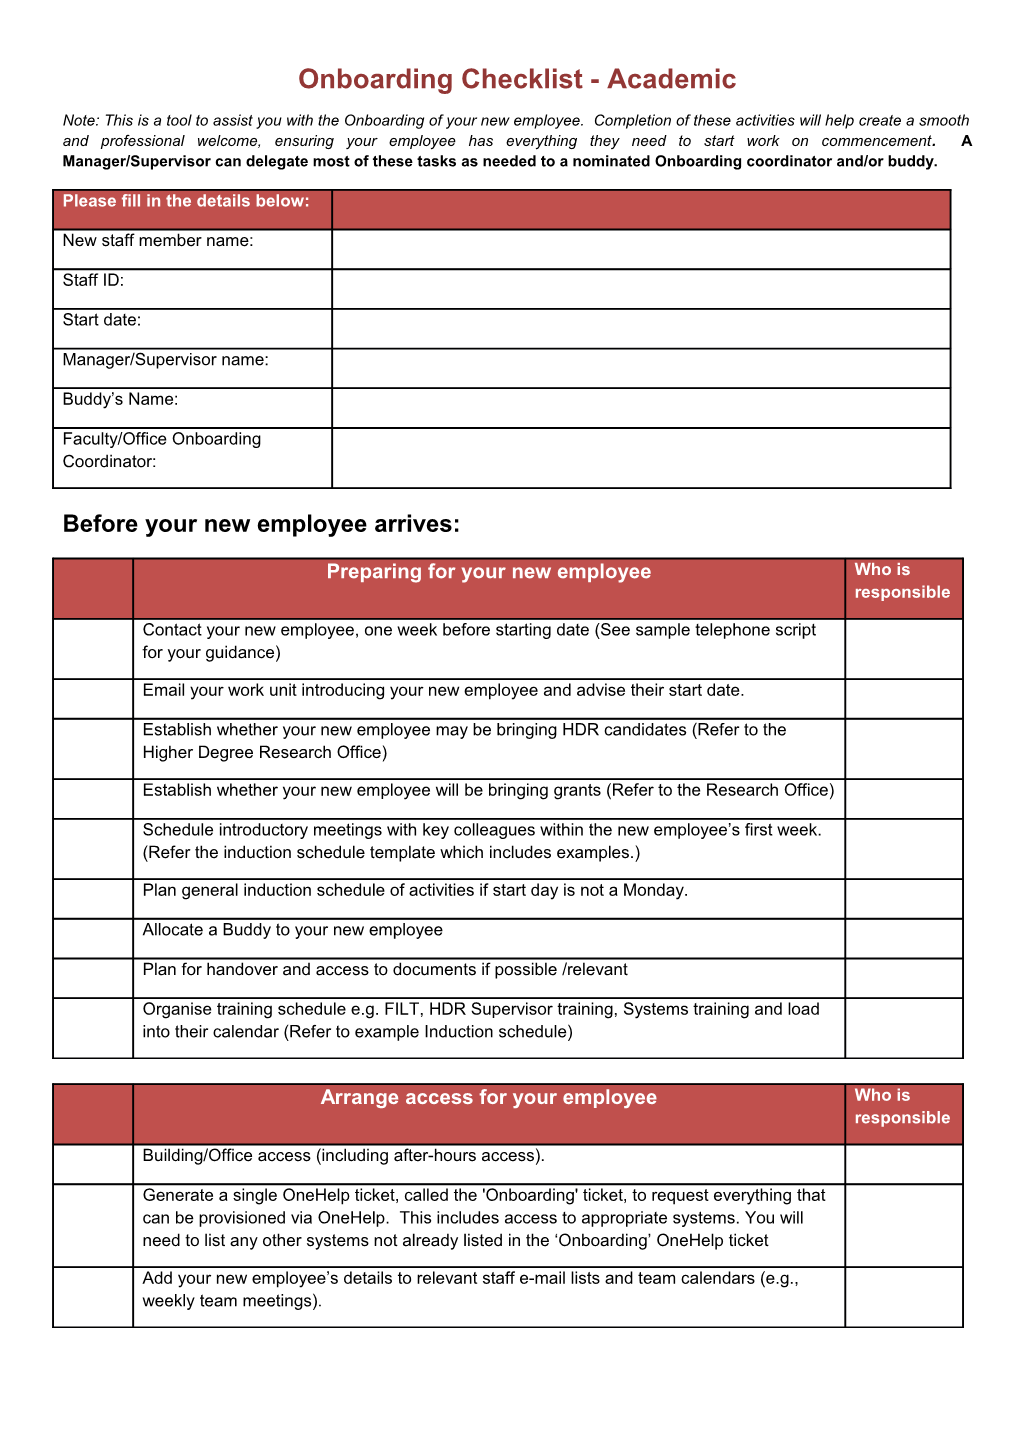 Action Point 41 - Onboarding Checklist 26.11.2014